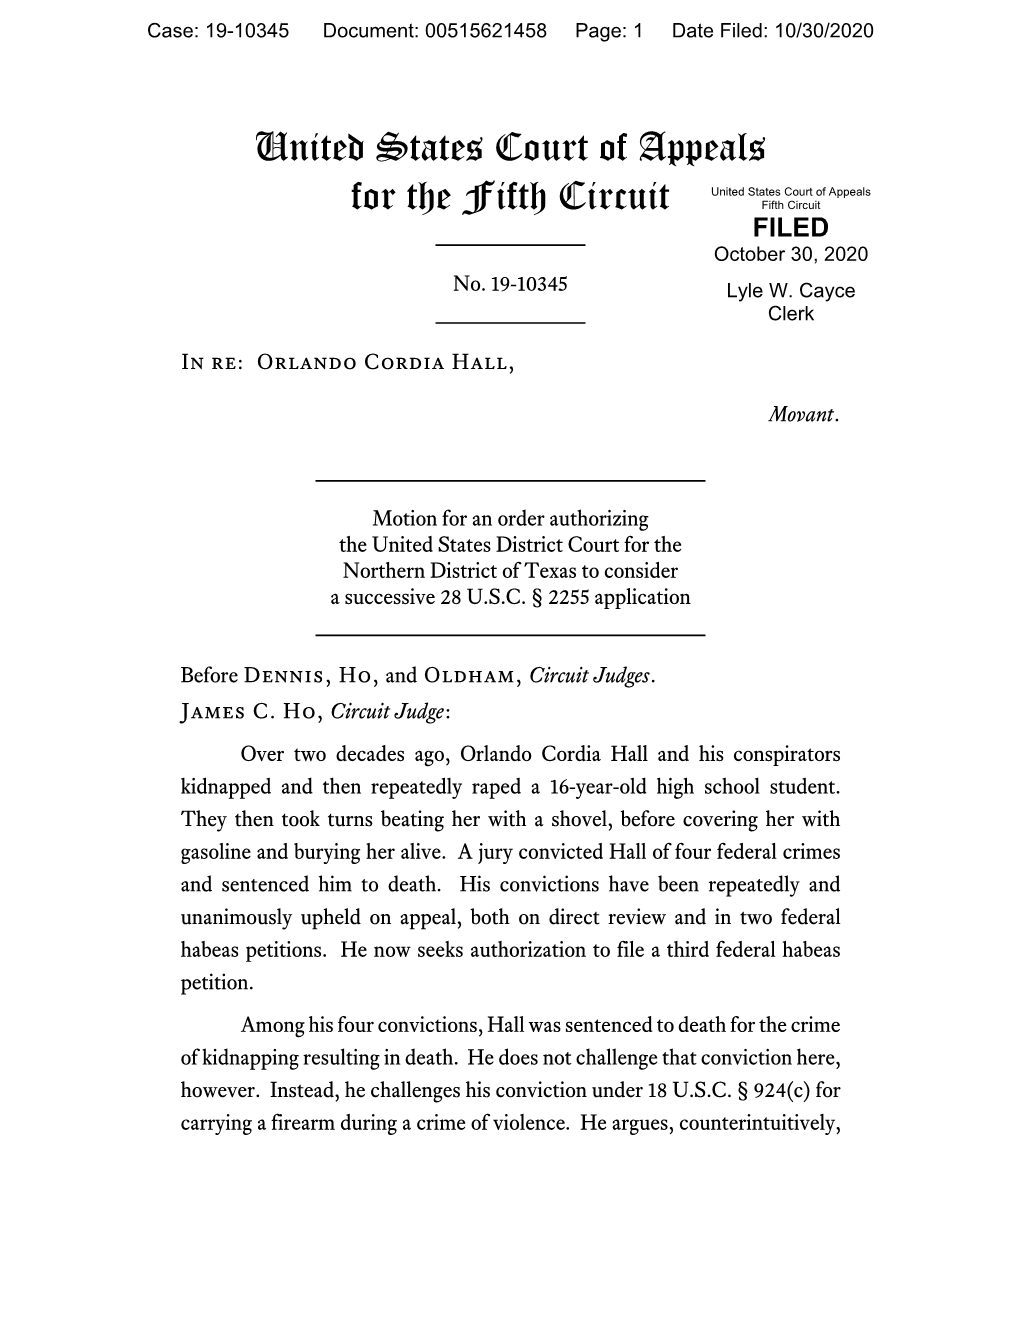 United States Court of Appeals for the Fifth Circuit Fifth Circuit FILED October 30, 2020